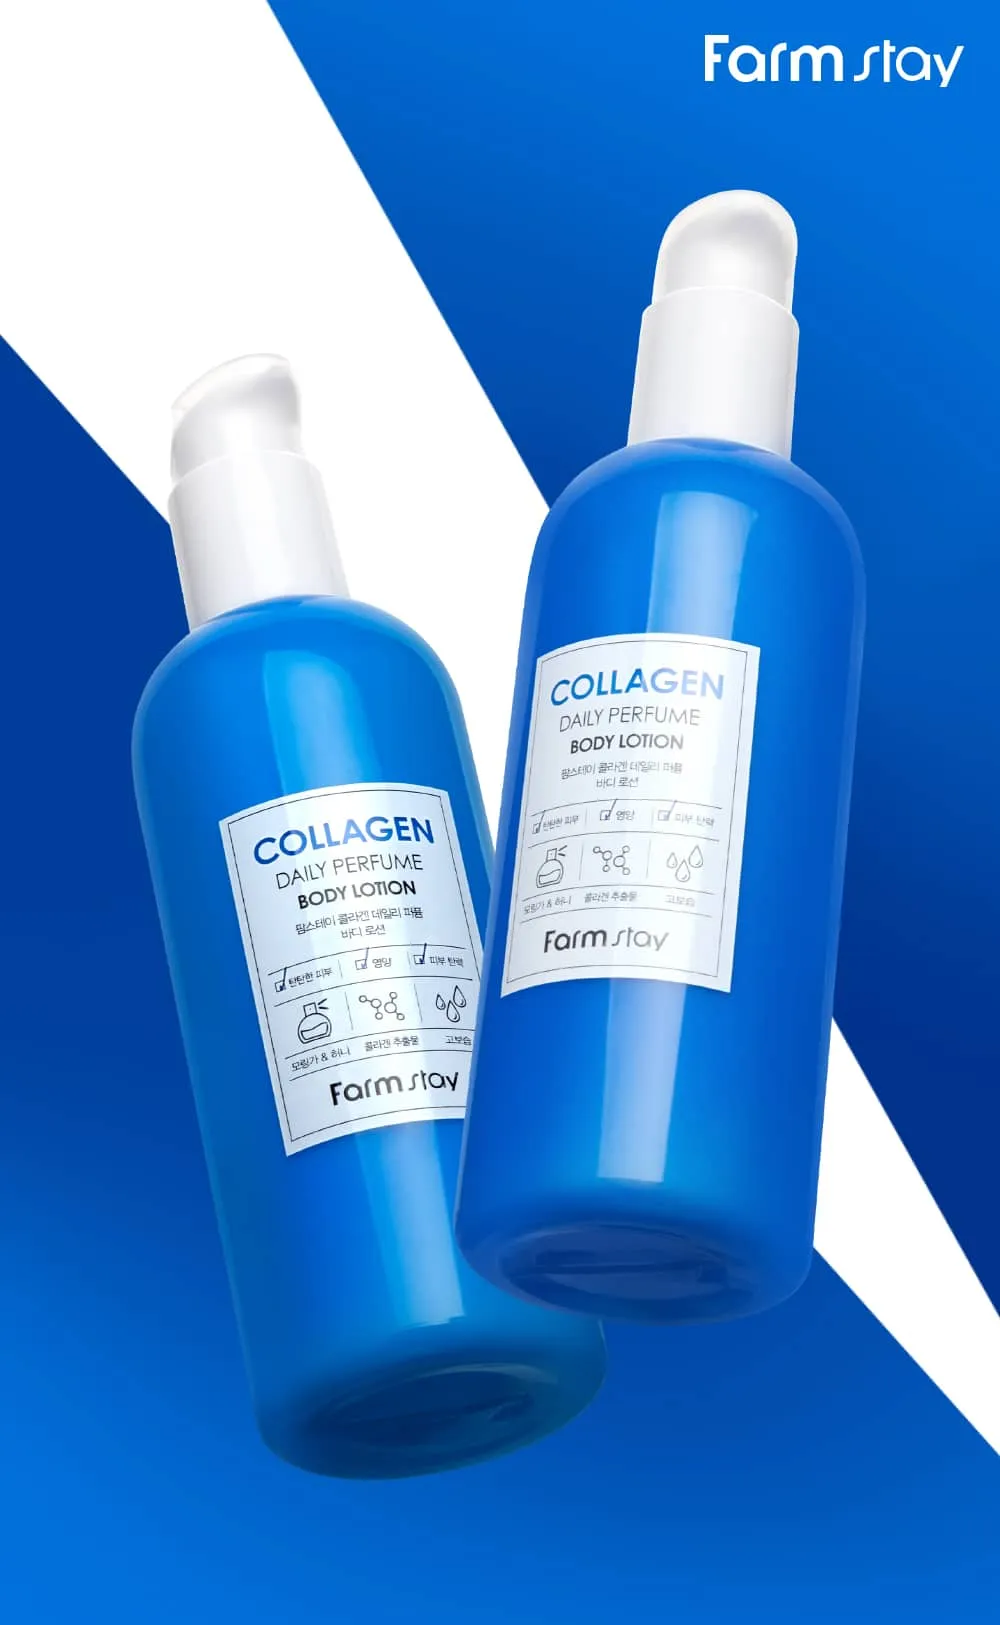 Collagen Daily Perfume Body Lotion Product Production Image